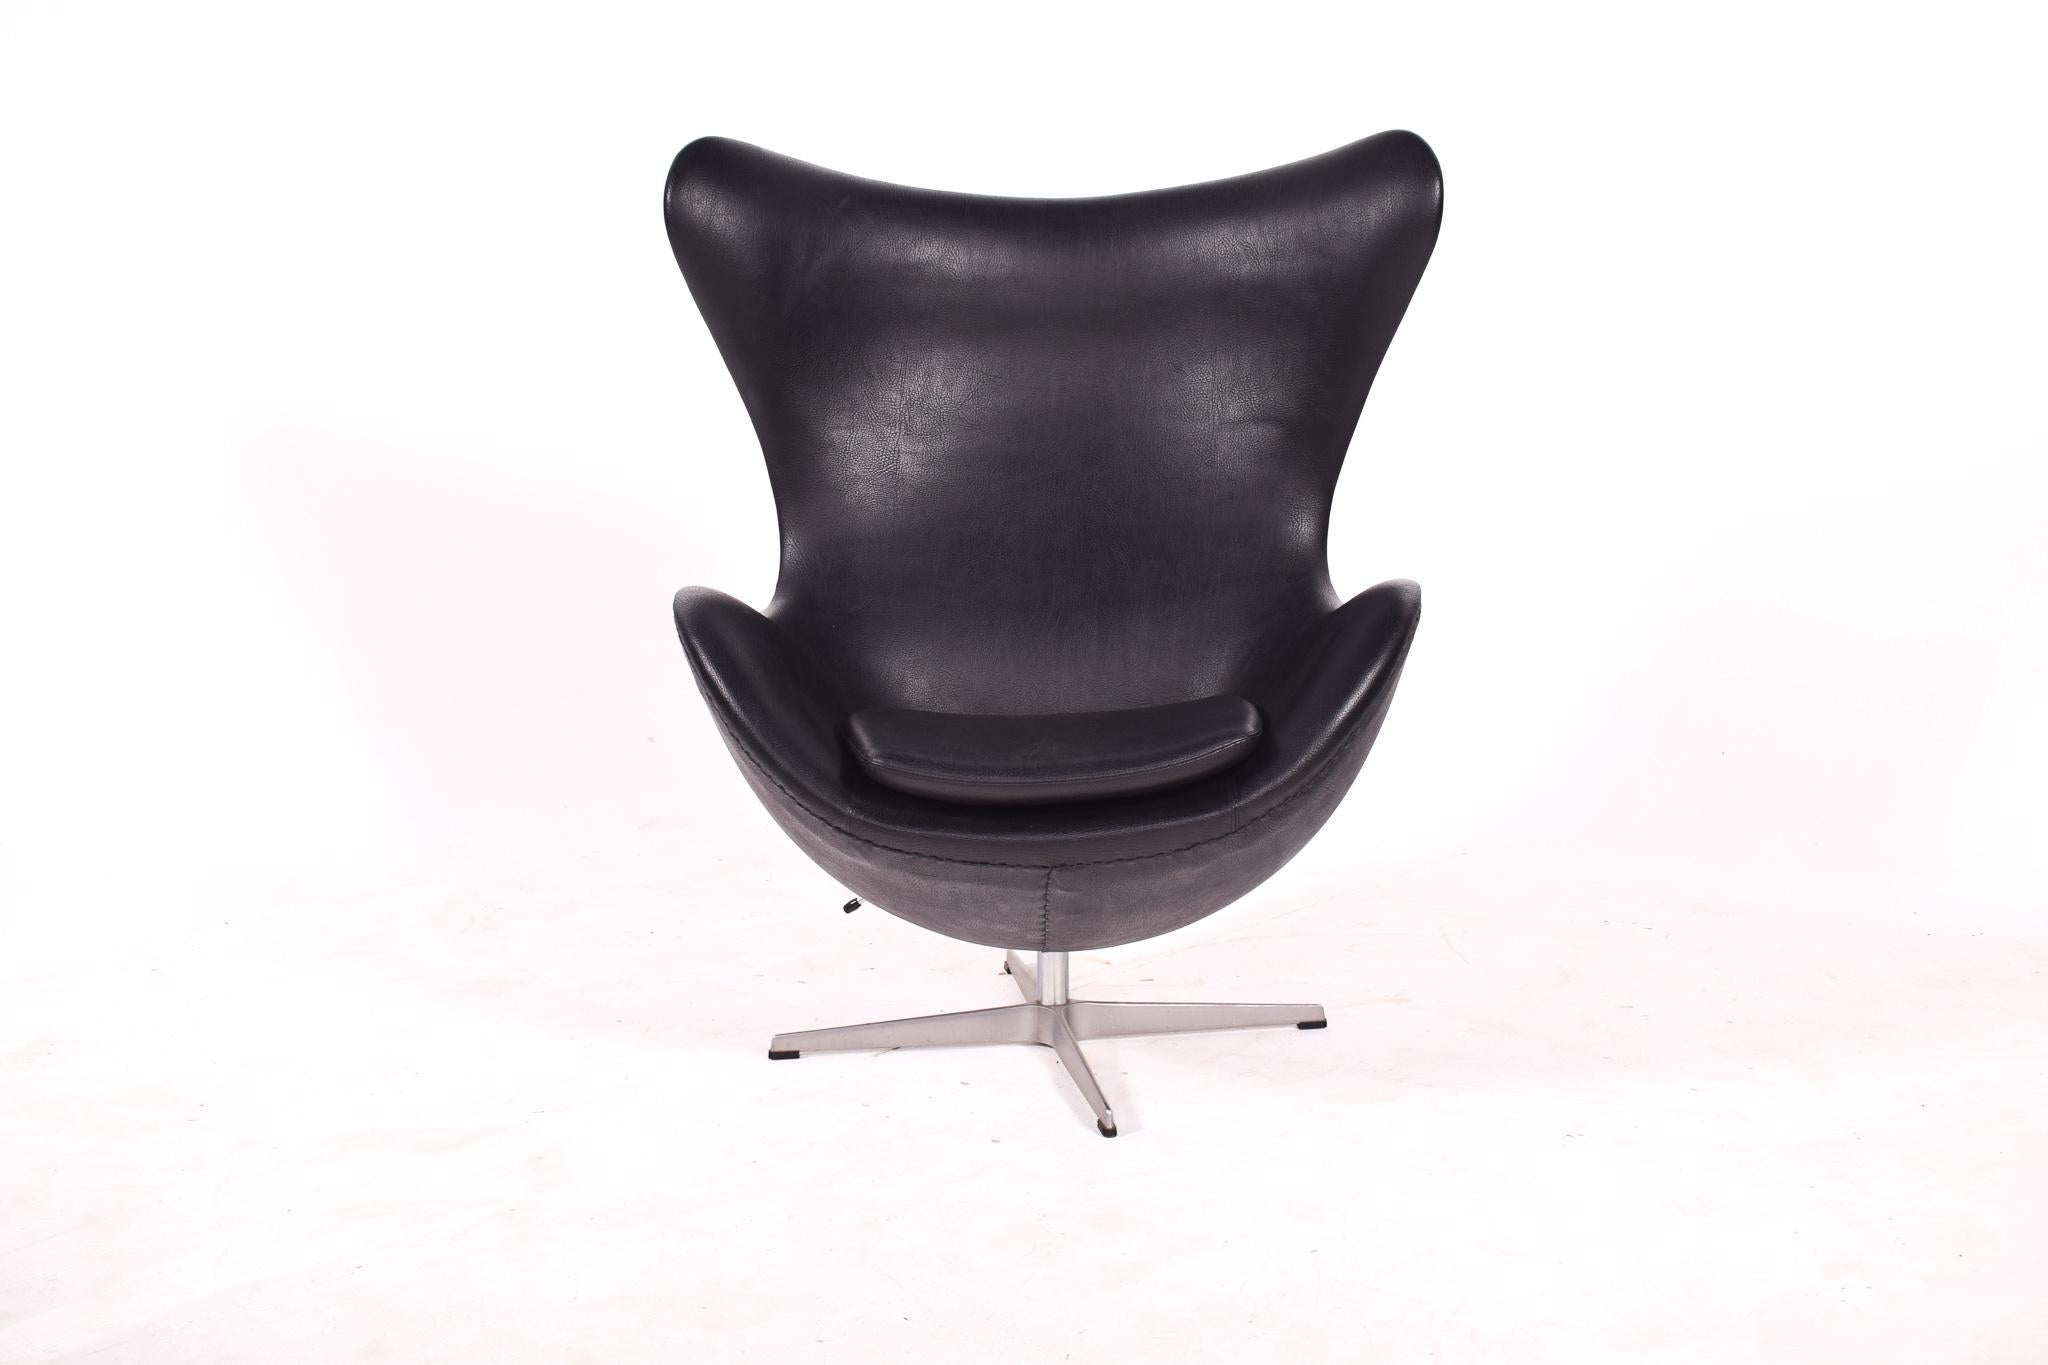 Original and iconic chair, designed by Arne Jacobsen and manufactured by Fritz Hansen. This egg chair features an aluminum frame with new upholstery.